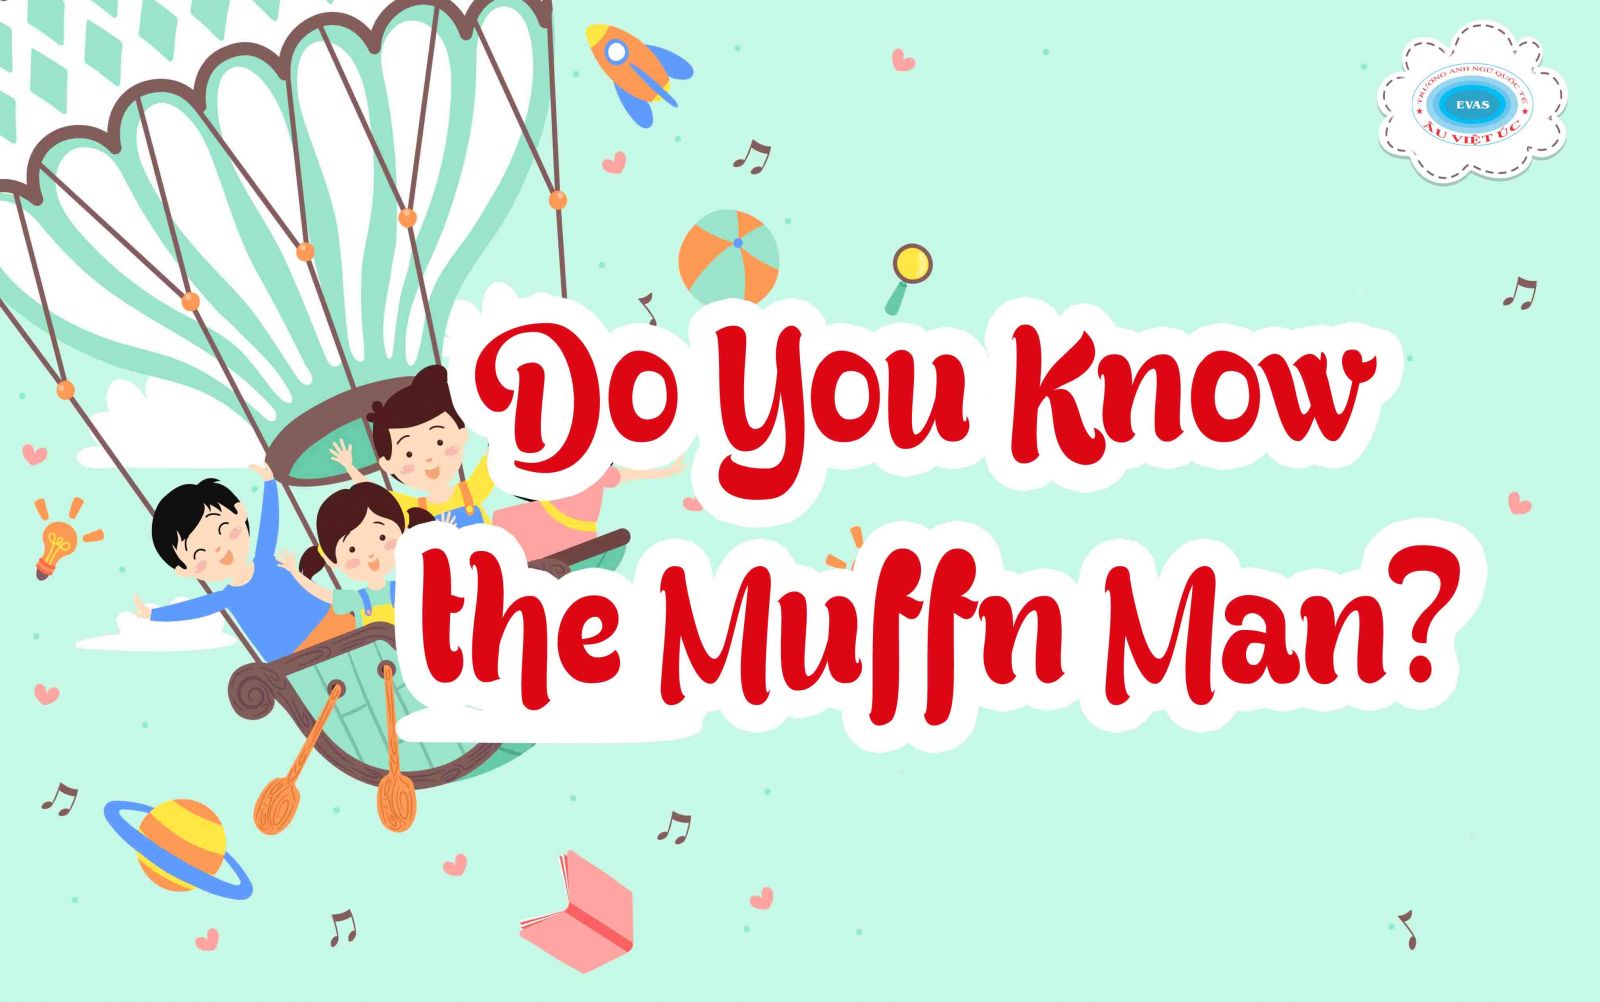 Do You Know the Muffn Man?